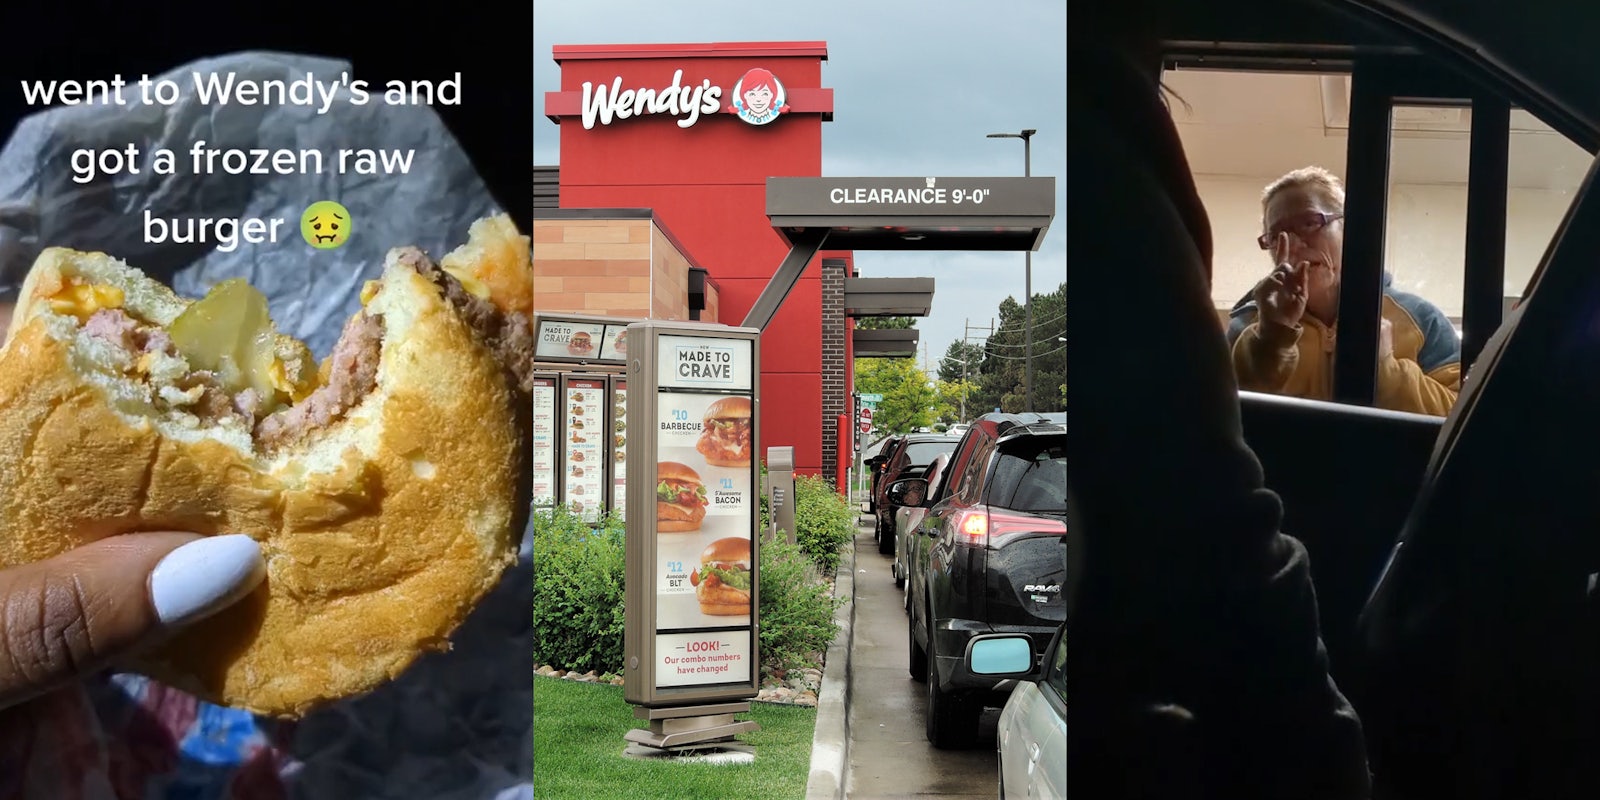 woman holding Wendy's burger patty looks raw caption 'went to Wendy's and got a frozen raw burger' (l) Wendy's drive thru with sign (c) woman at Wendy's drive thu window speaking to worker with finger pointing (r)